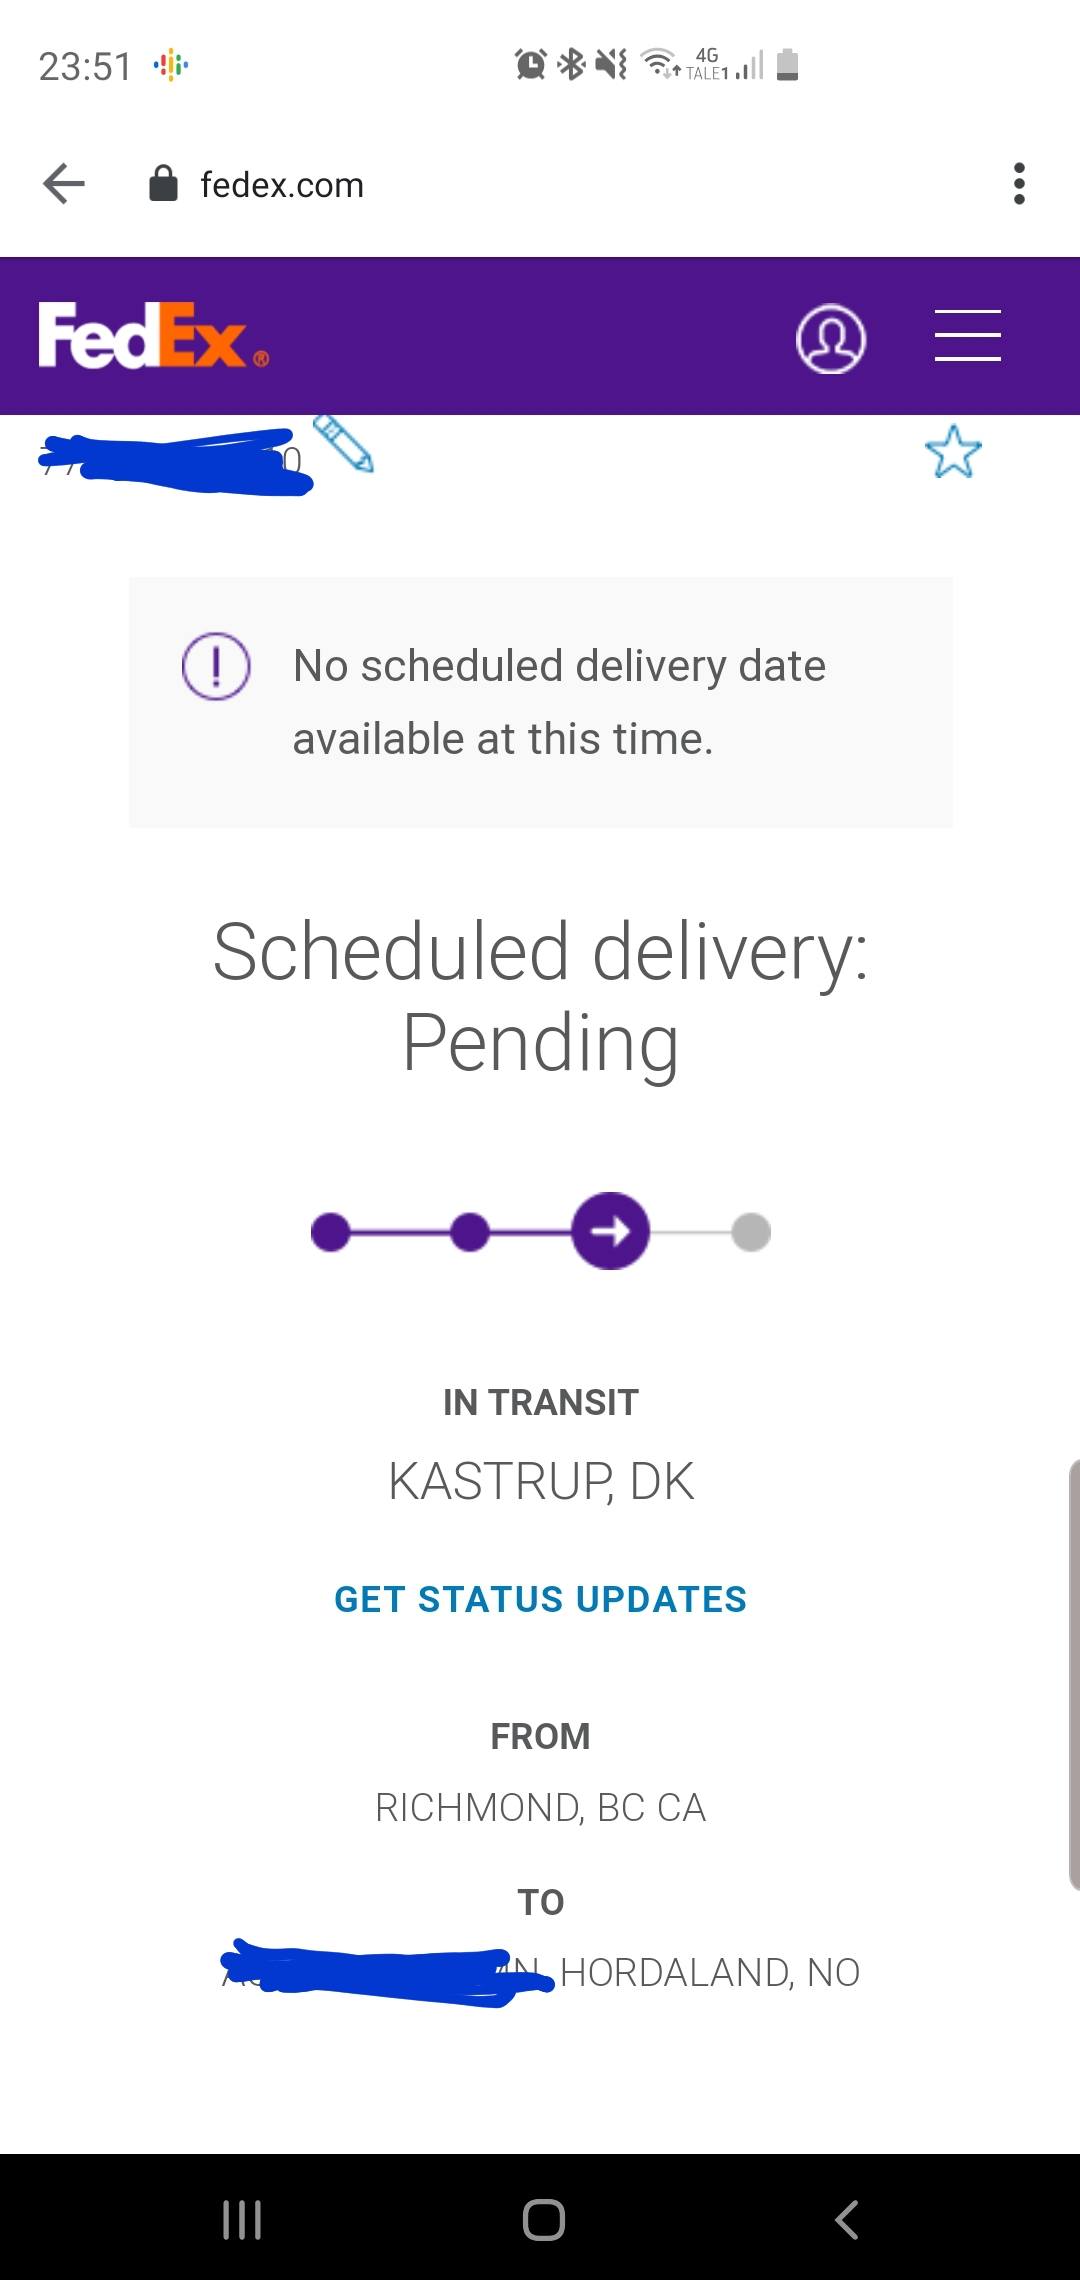 does fedex deliver earlier than scheduled date